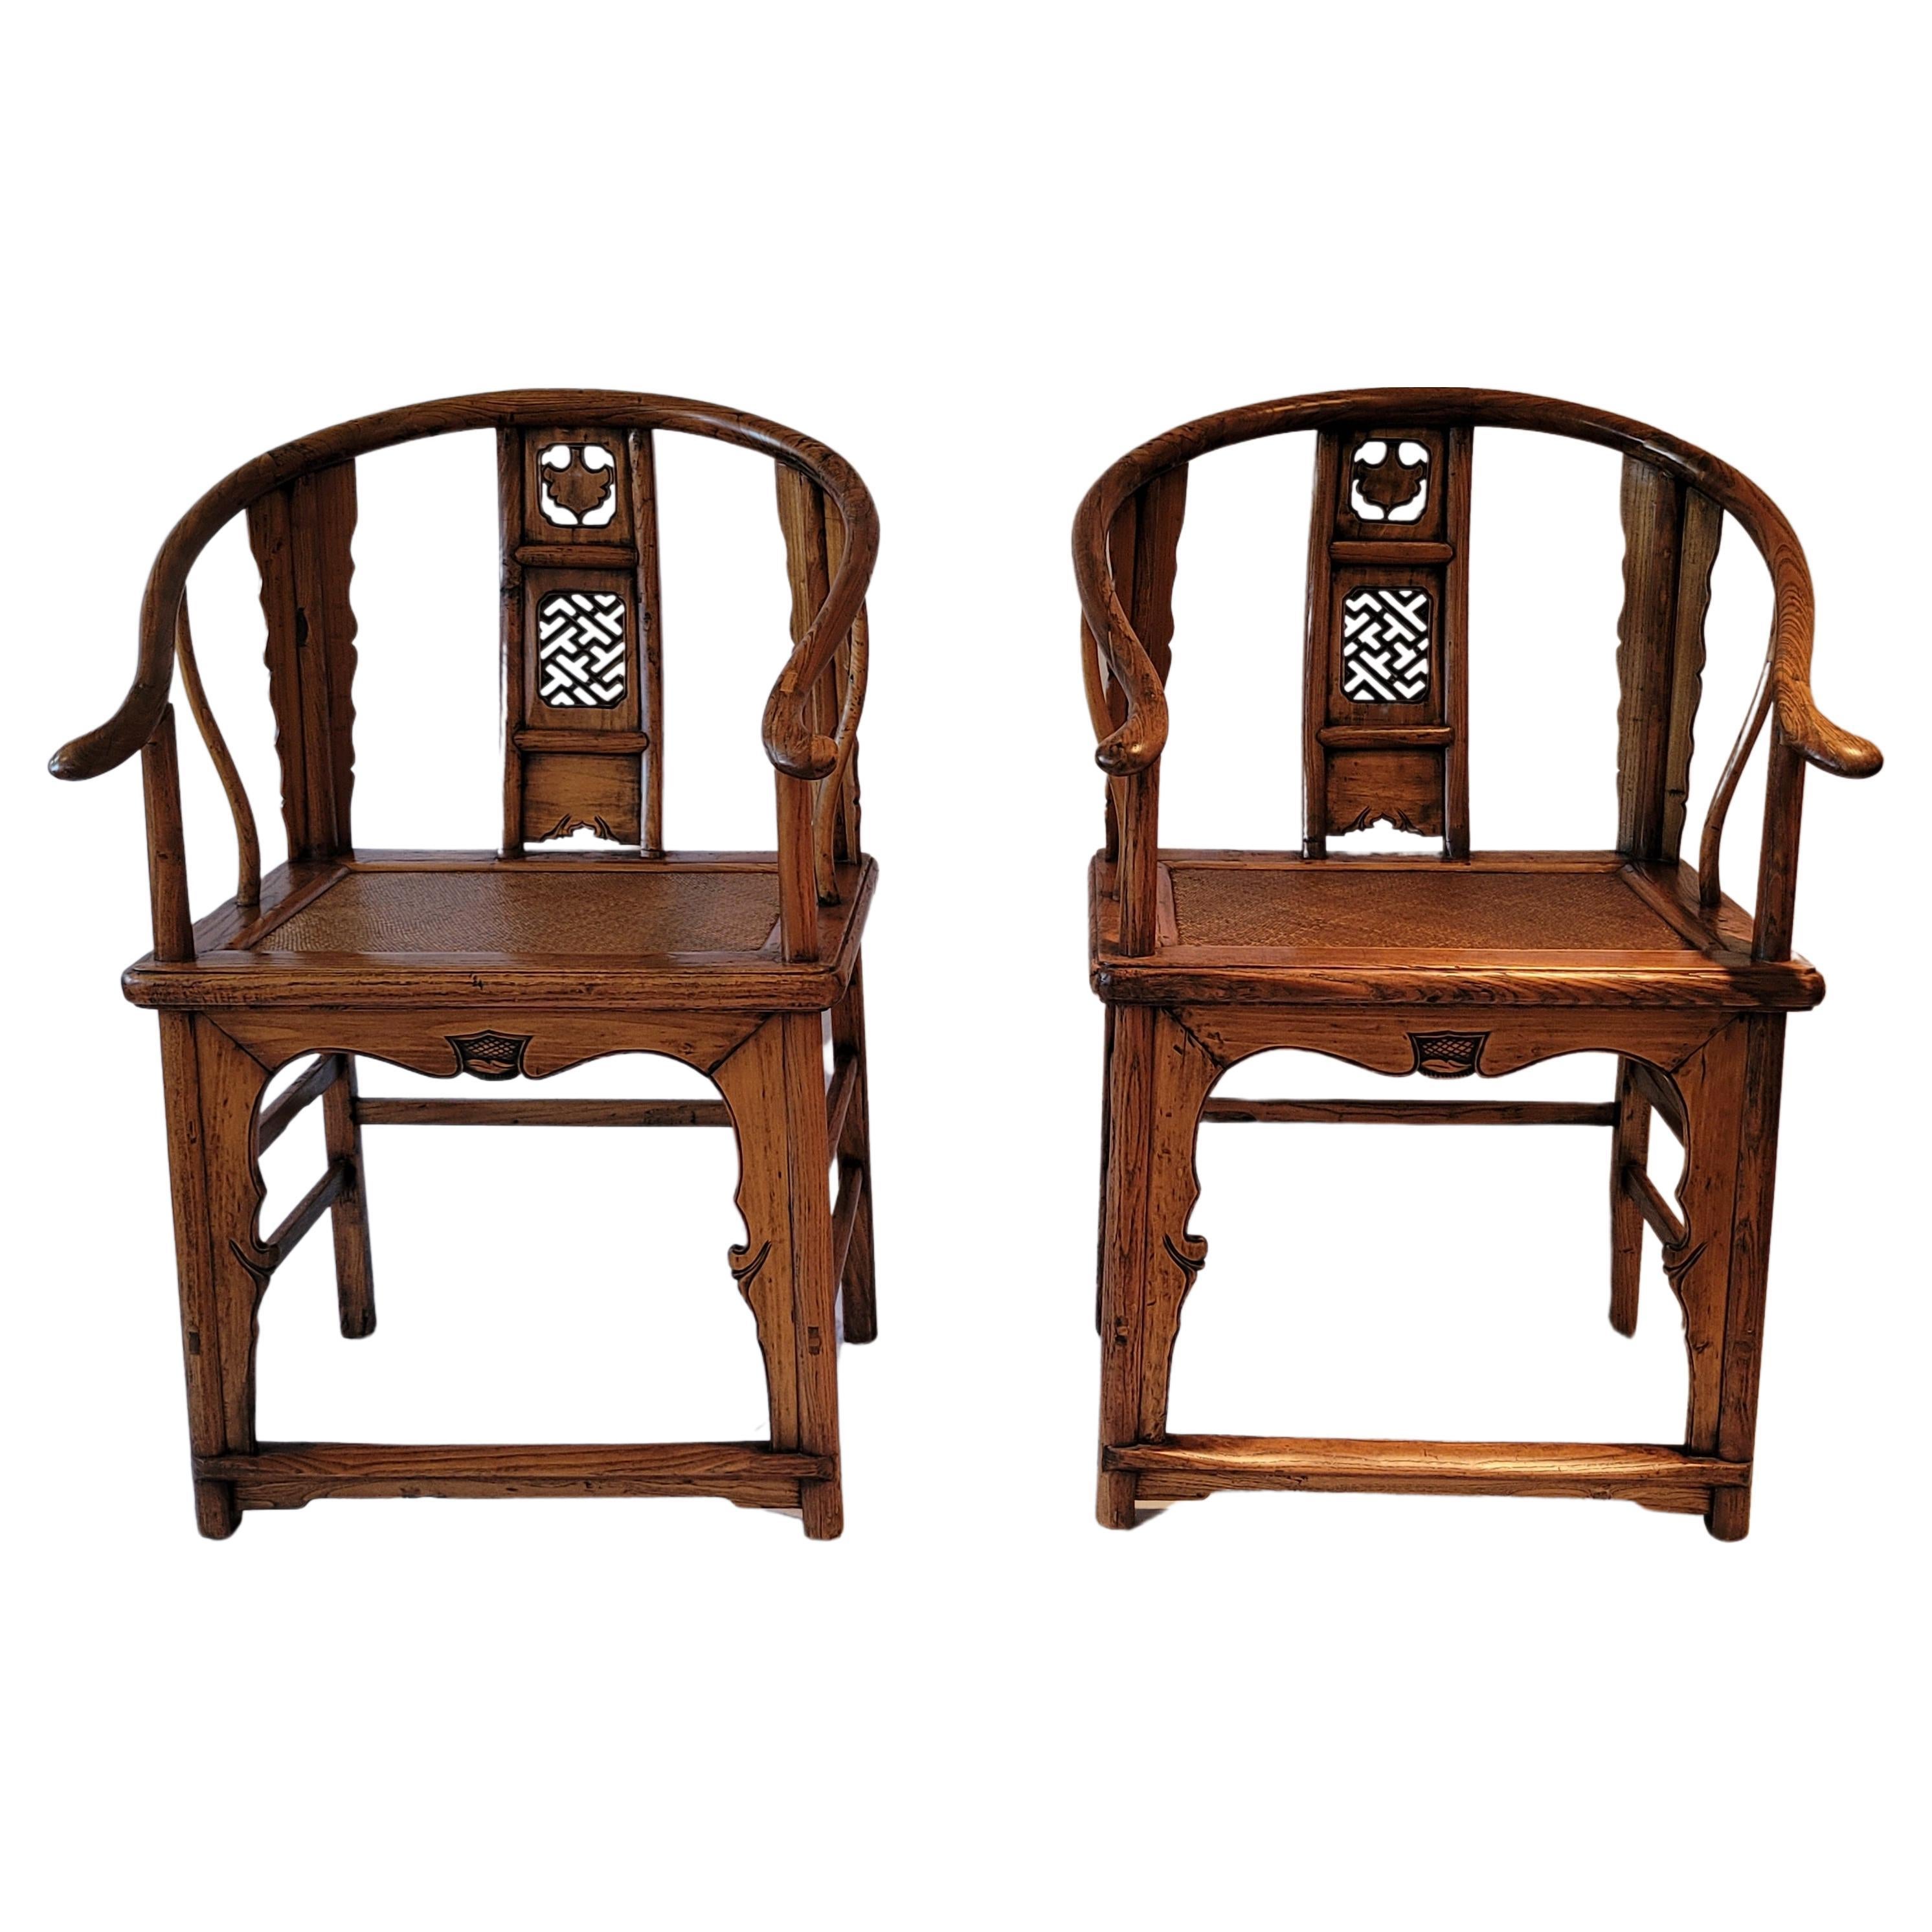 Pair of Horseshoe Back Chairs - mid 19th Century For Sale